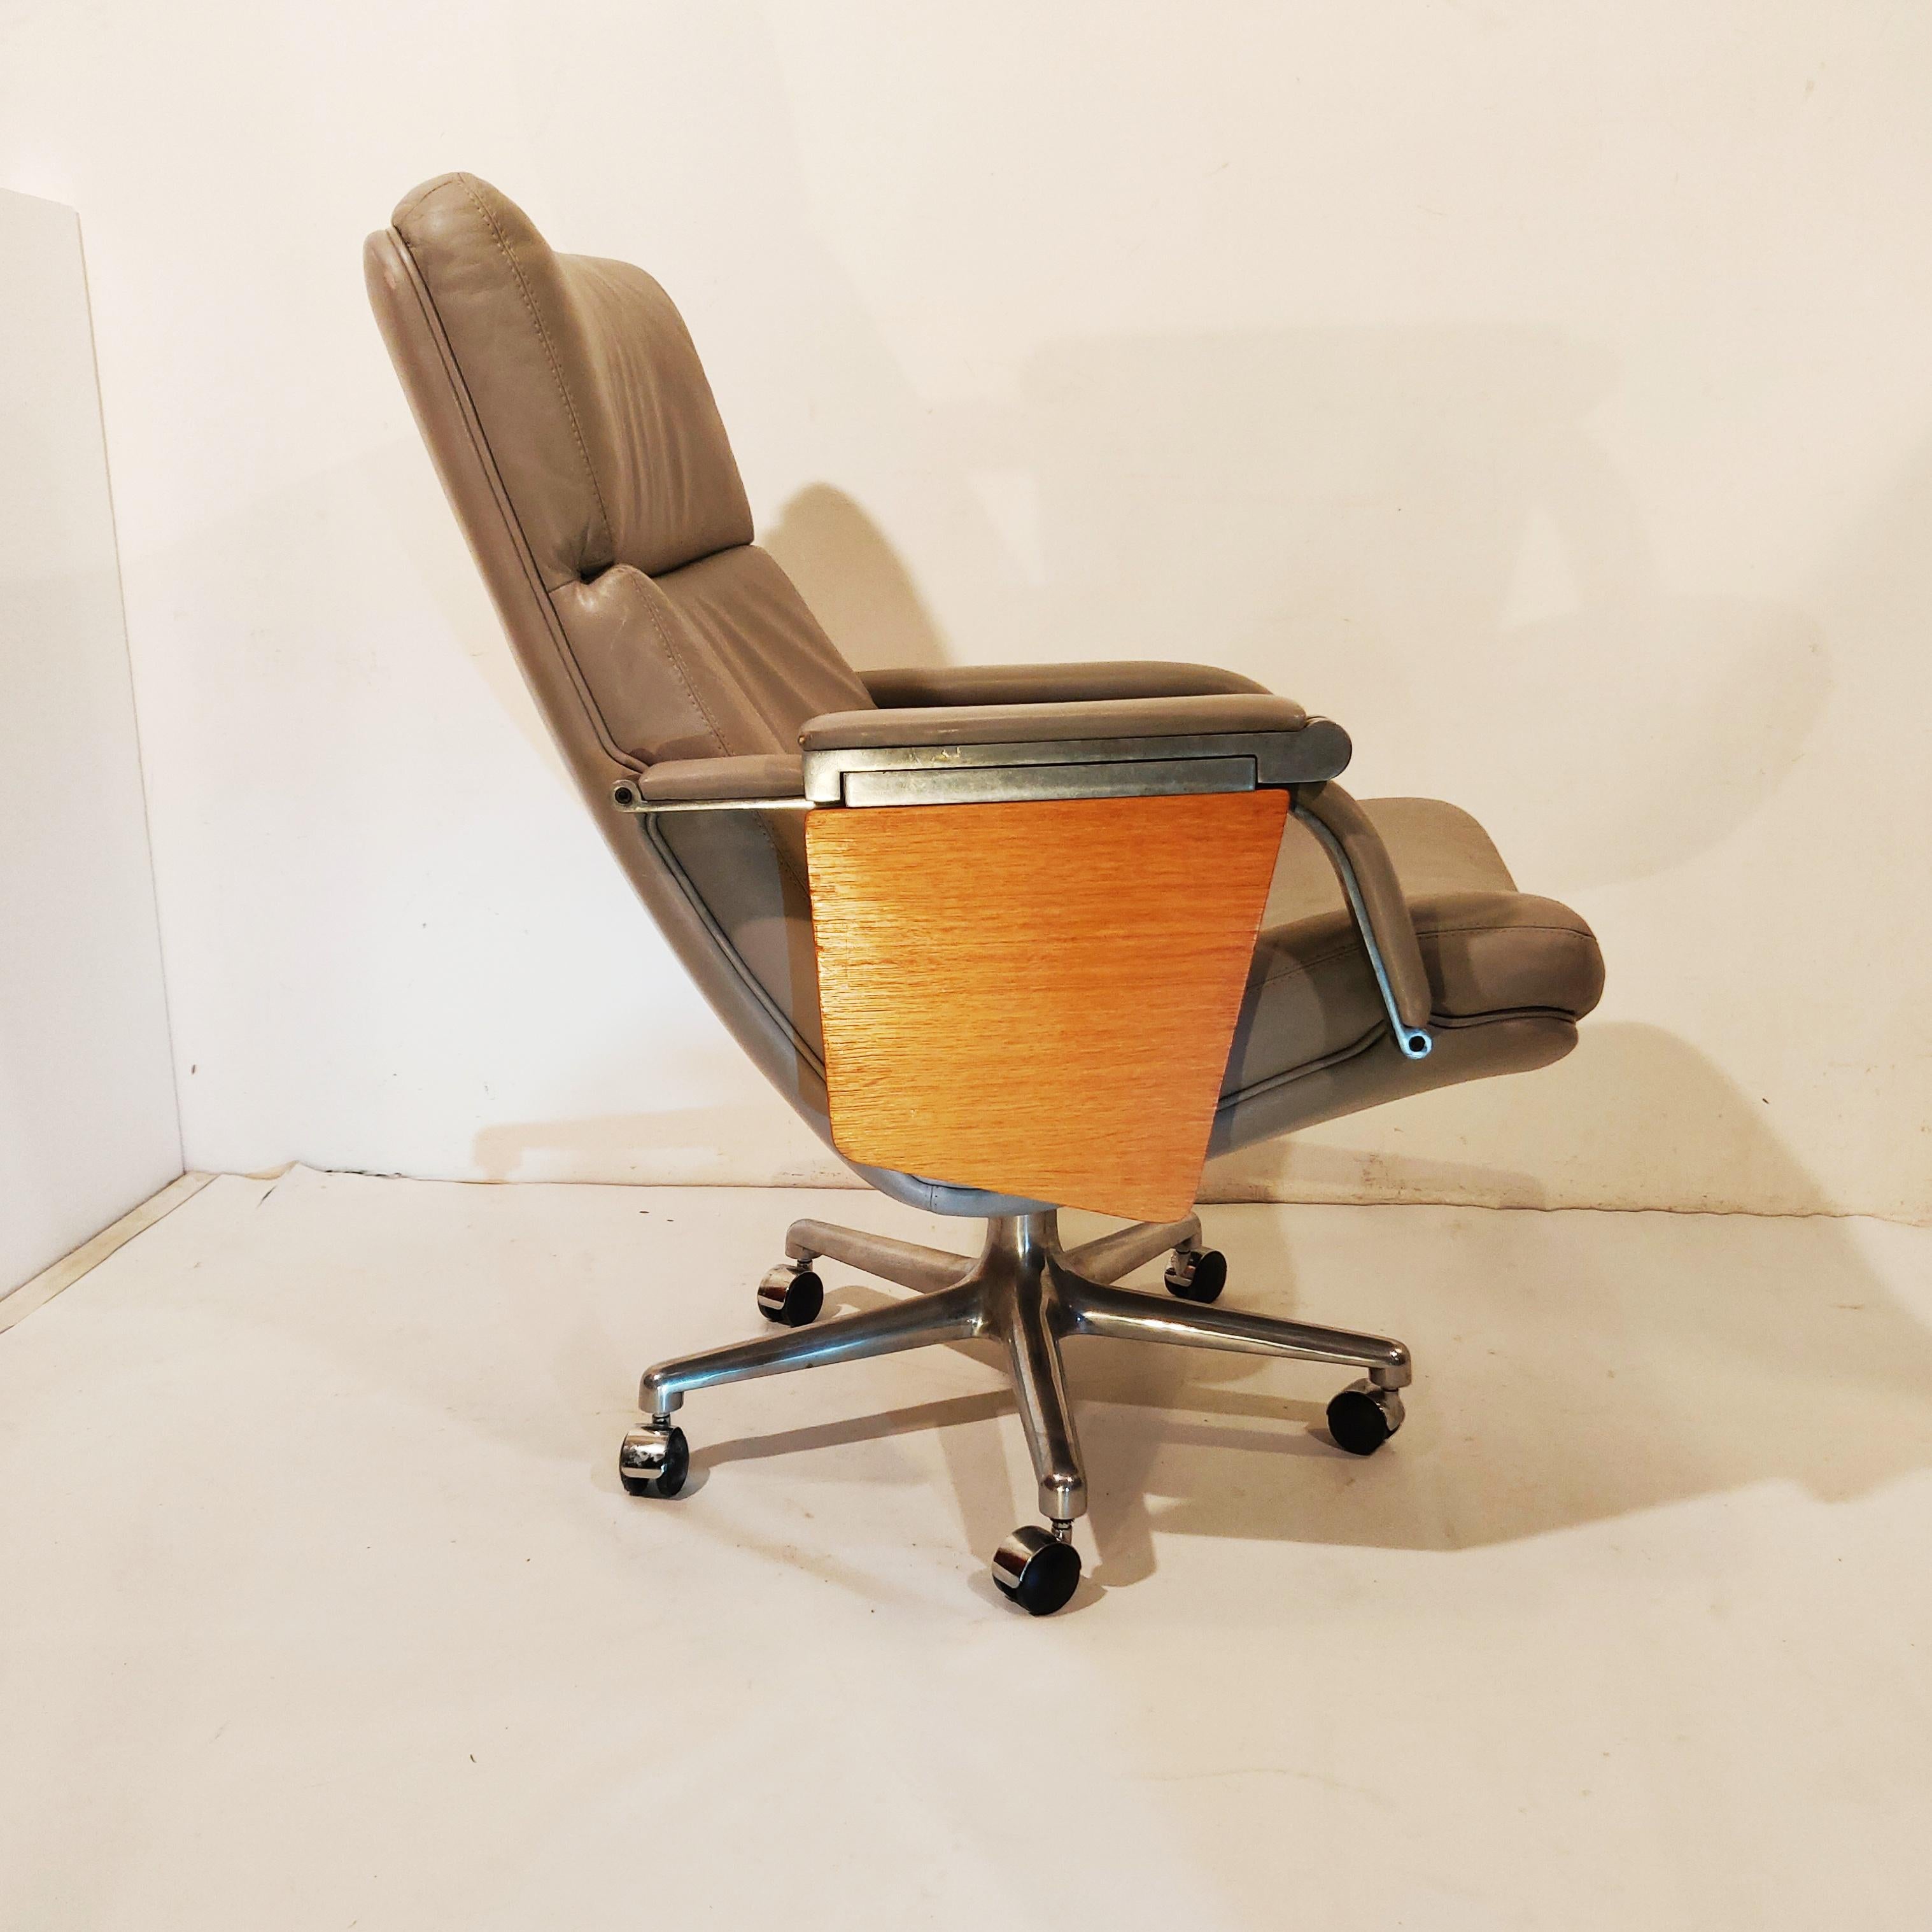 European Leather Swivel Chair with Wooden Writing Board by Geoffrey Harcourt, 1970s For Sale